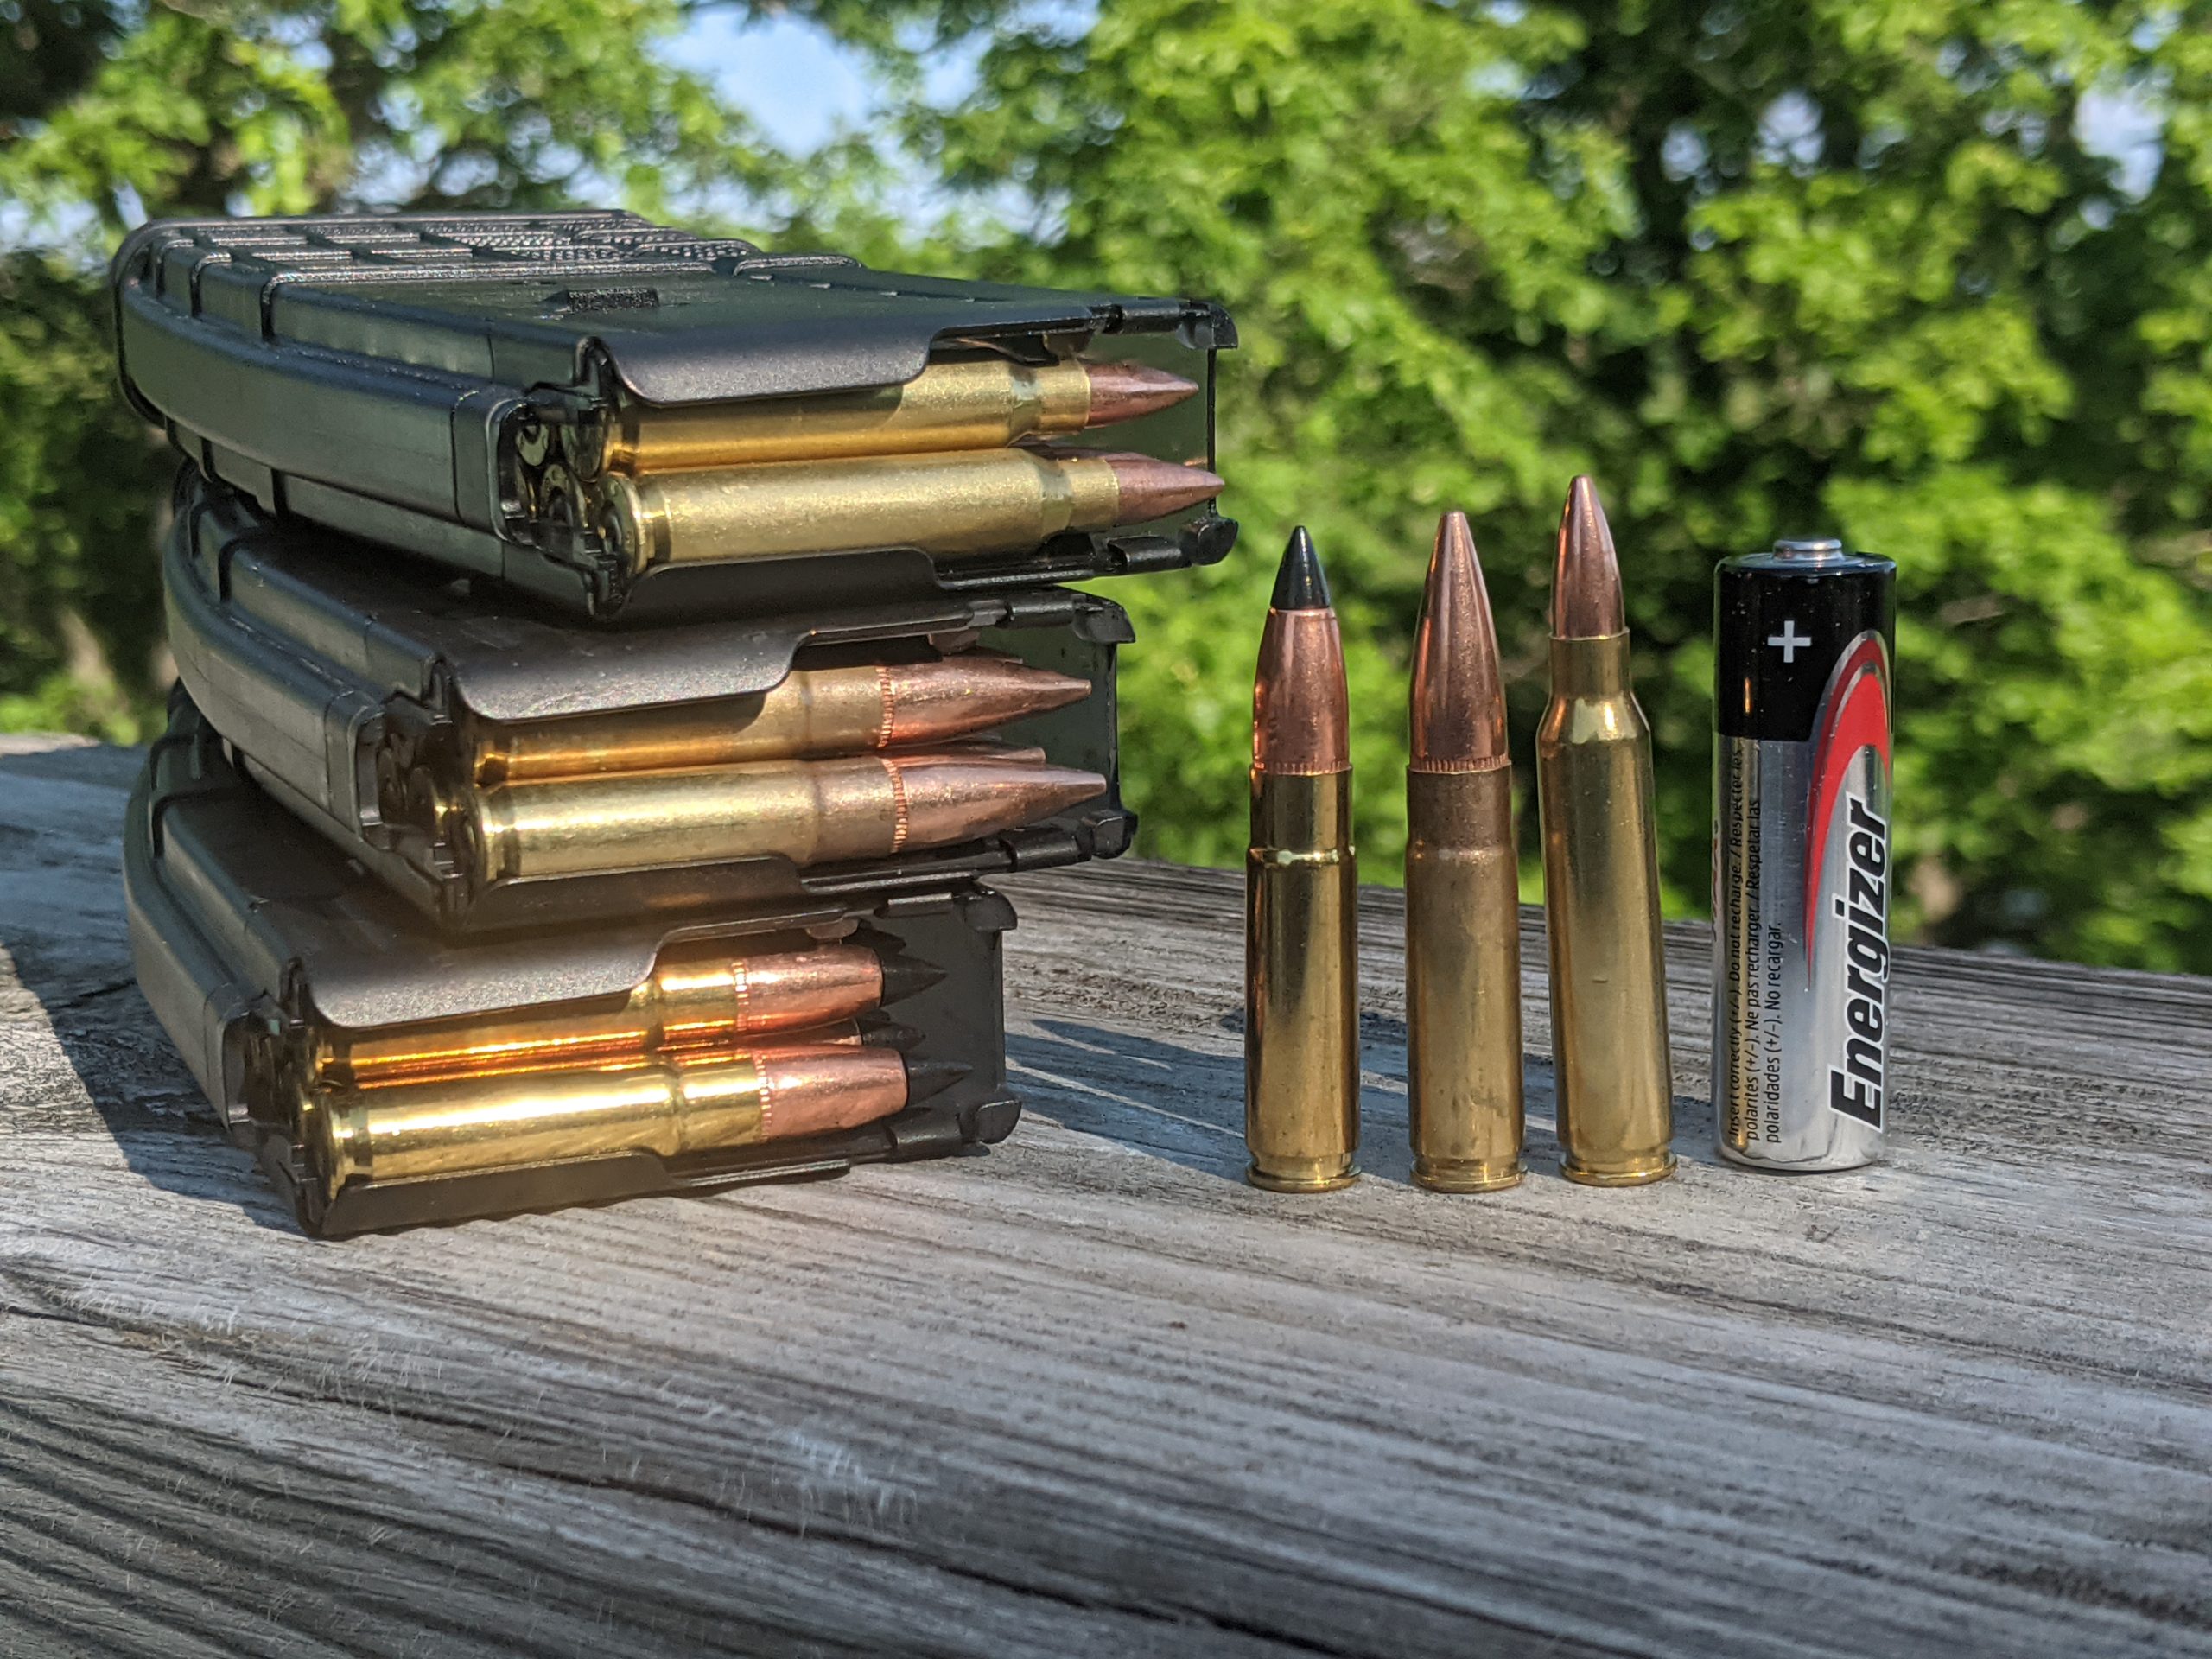 300 Blackout Ammo v. 5.56 NATO/.223 Rounds ~ An In Depth Report Part 1